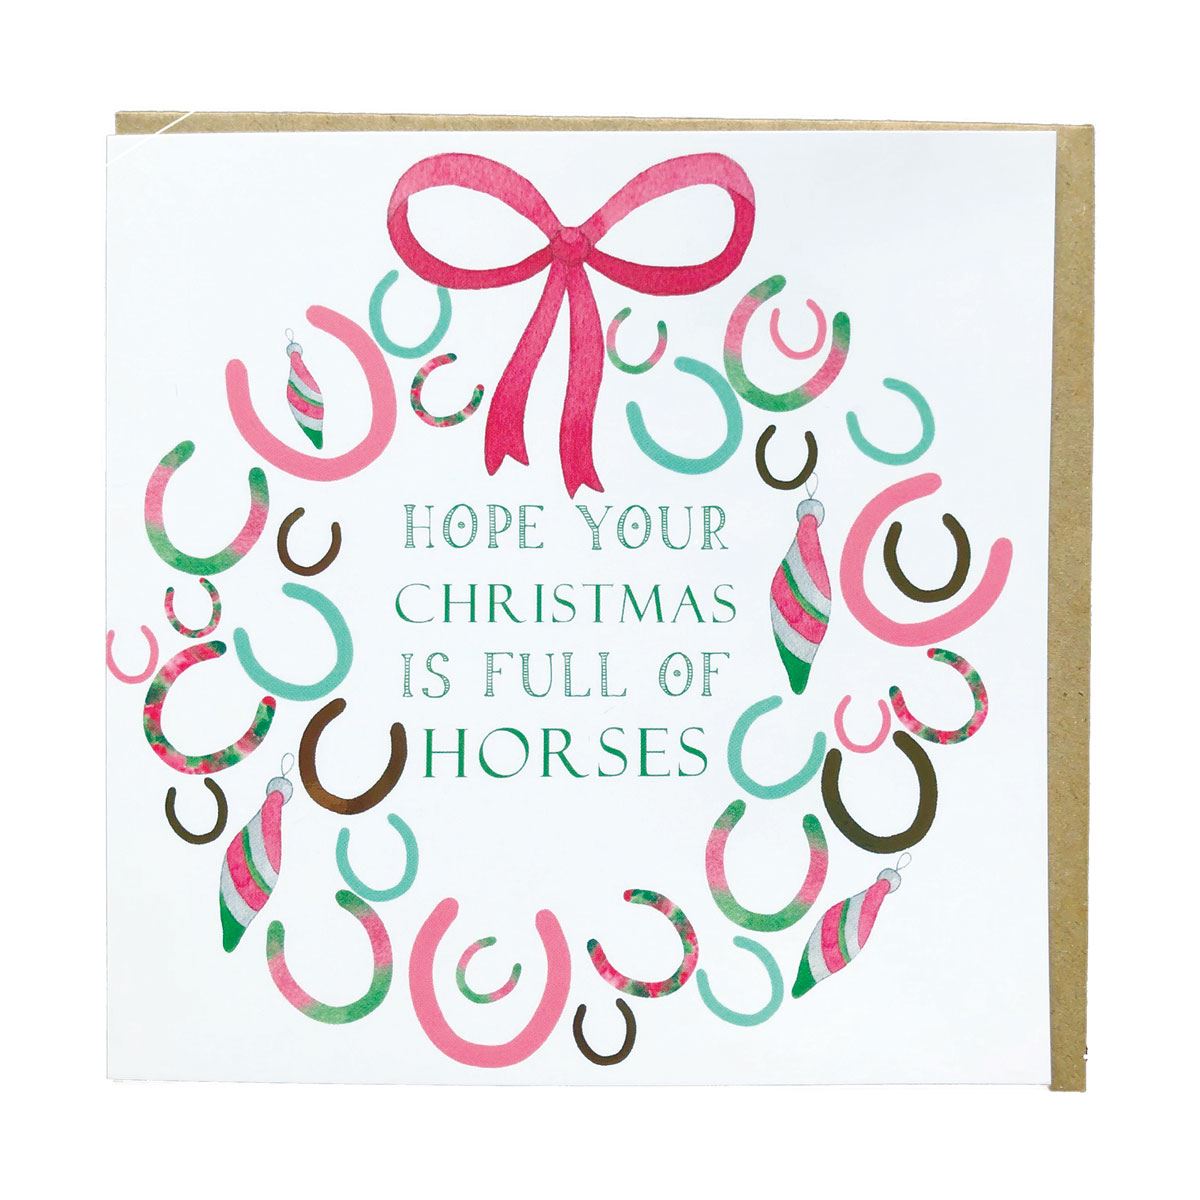 Gubblecote Christmas Card - Just Horse Riders